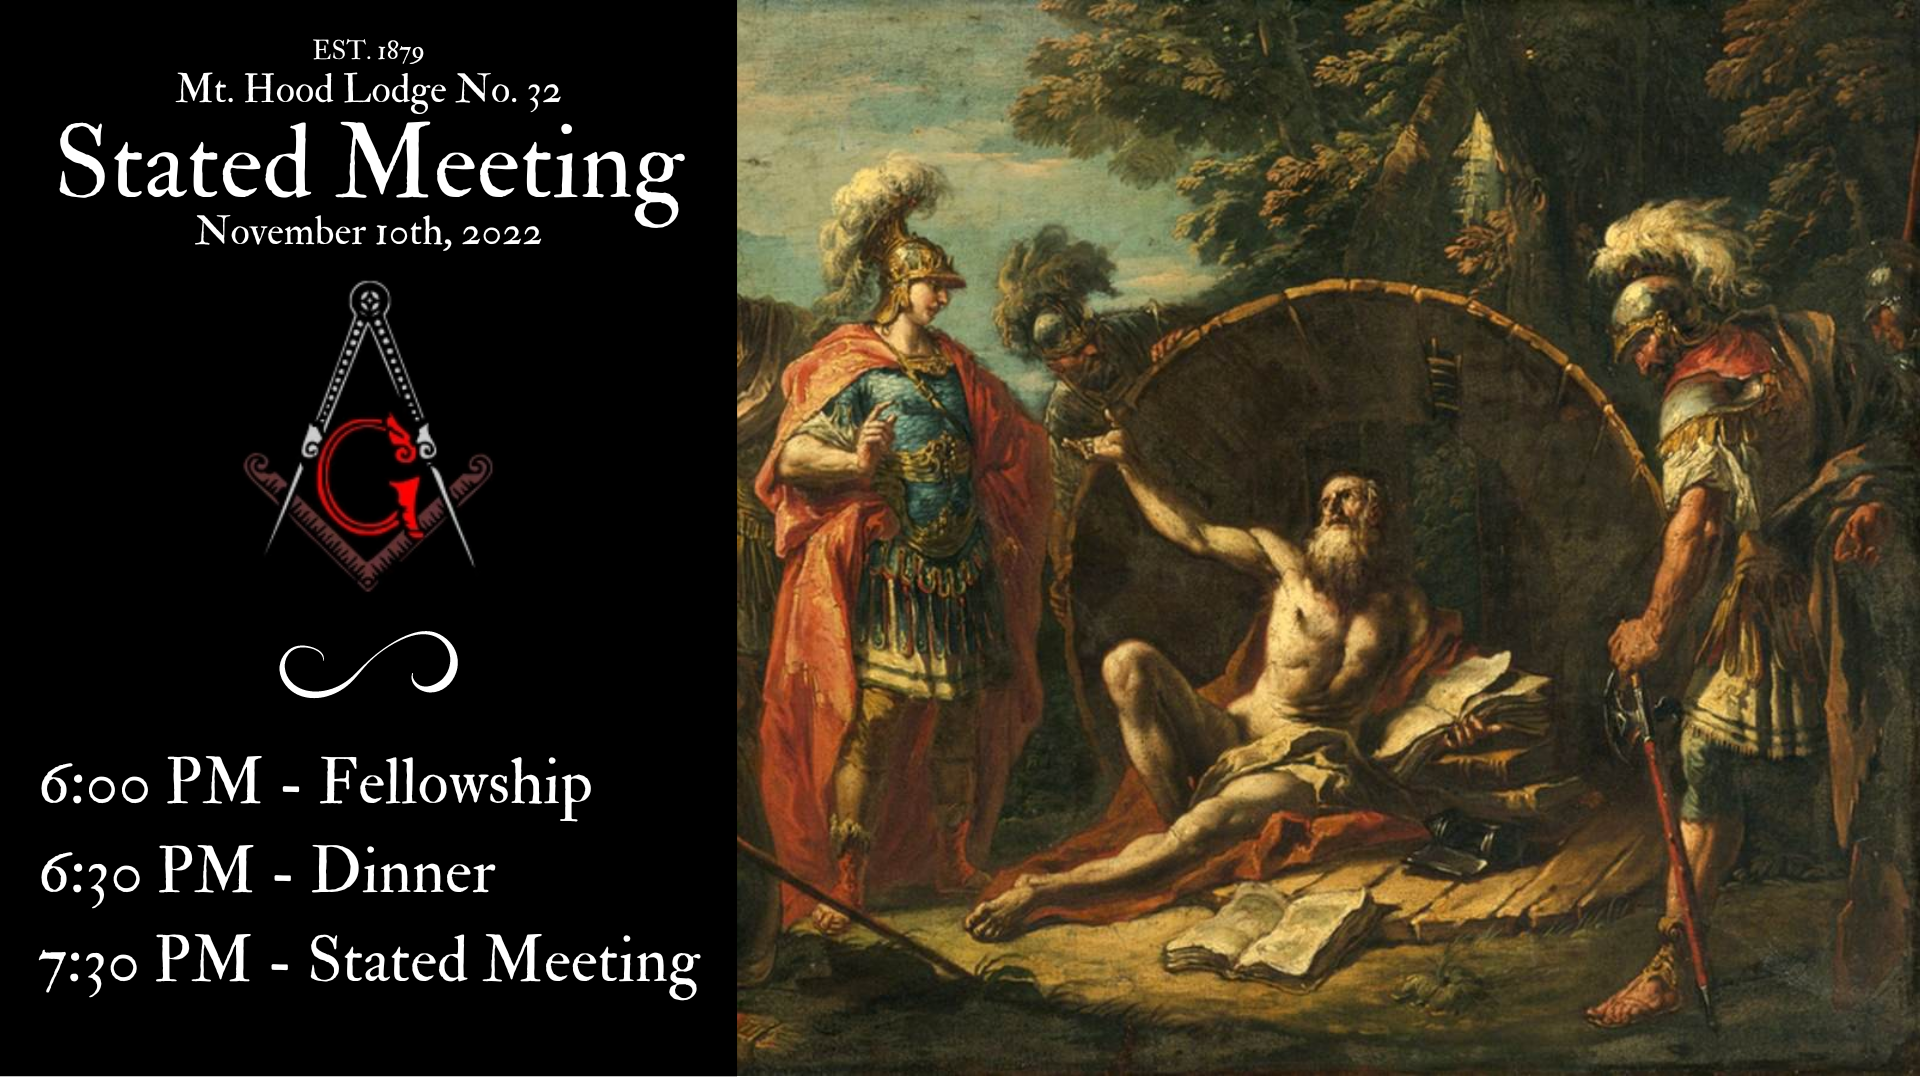 Stated Meeting – Nov. 10th, 2022